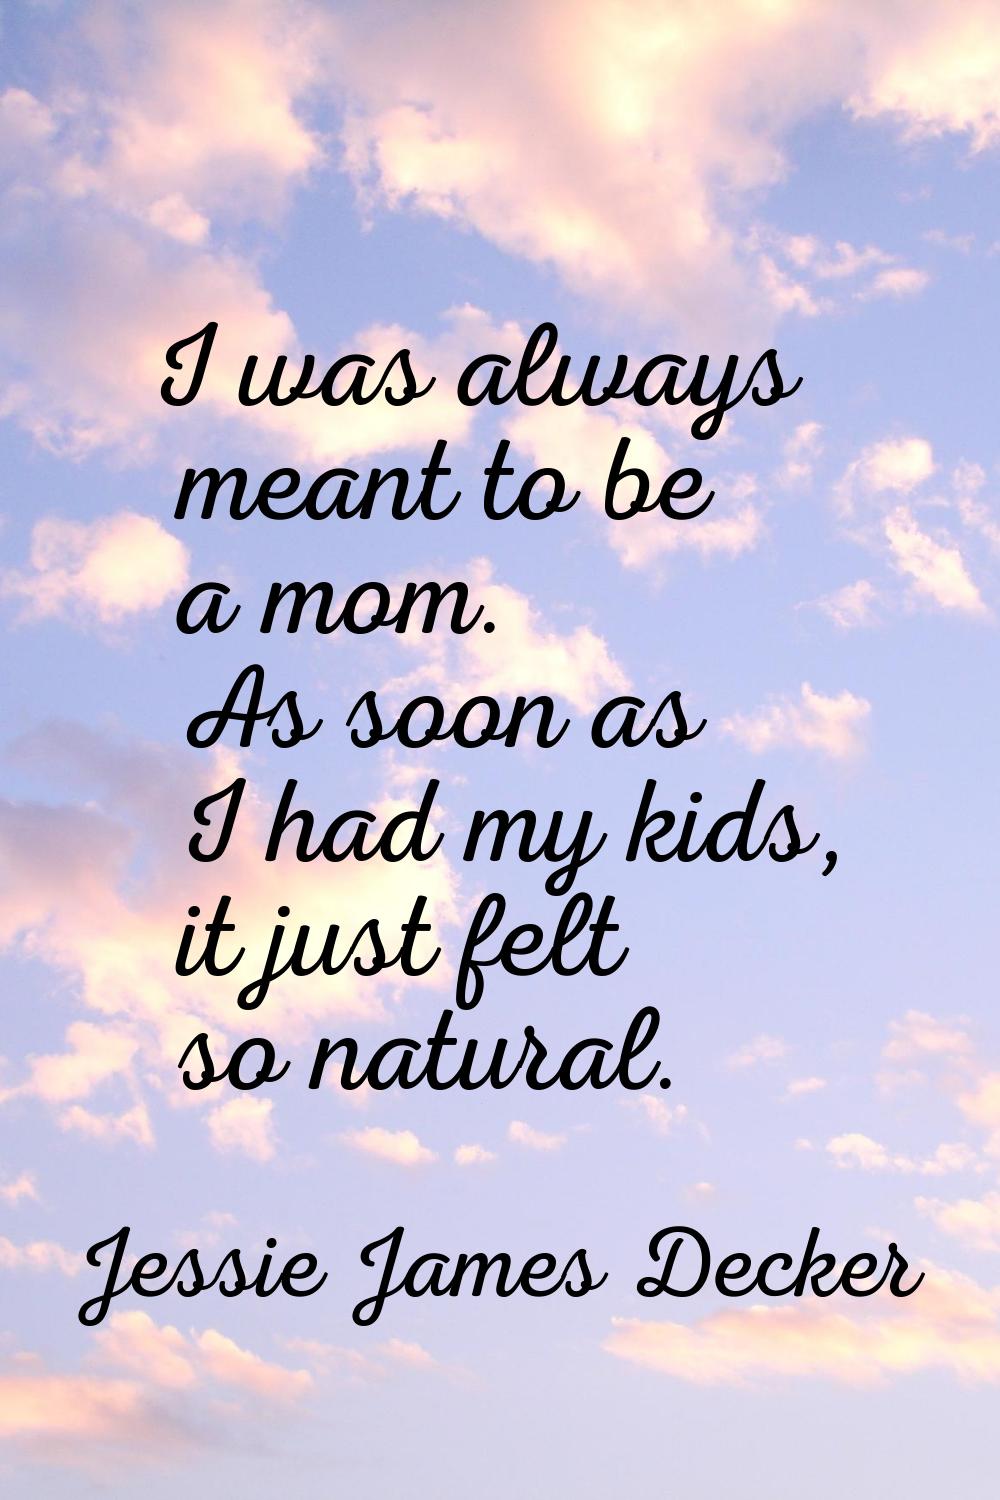 I was always meant to be a mom. As soon as I had my kids, it just felt so natural.